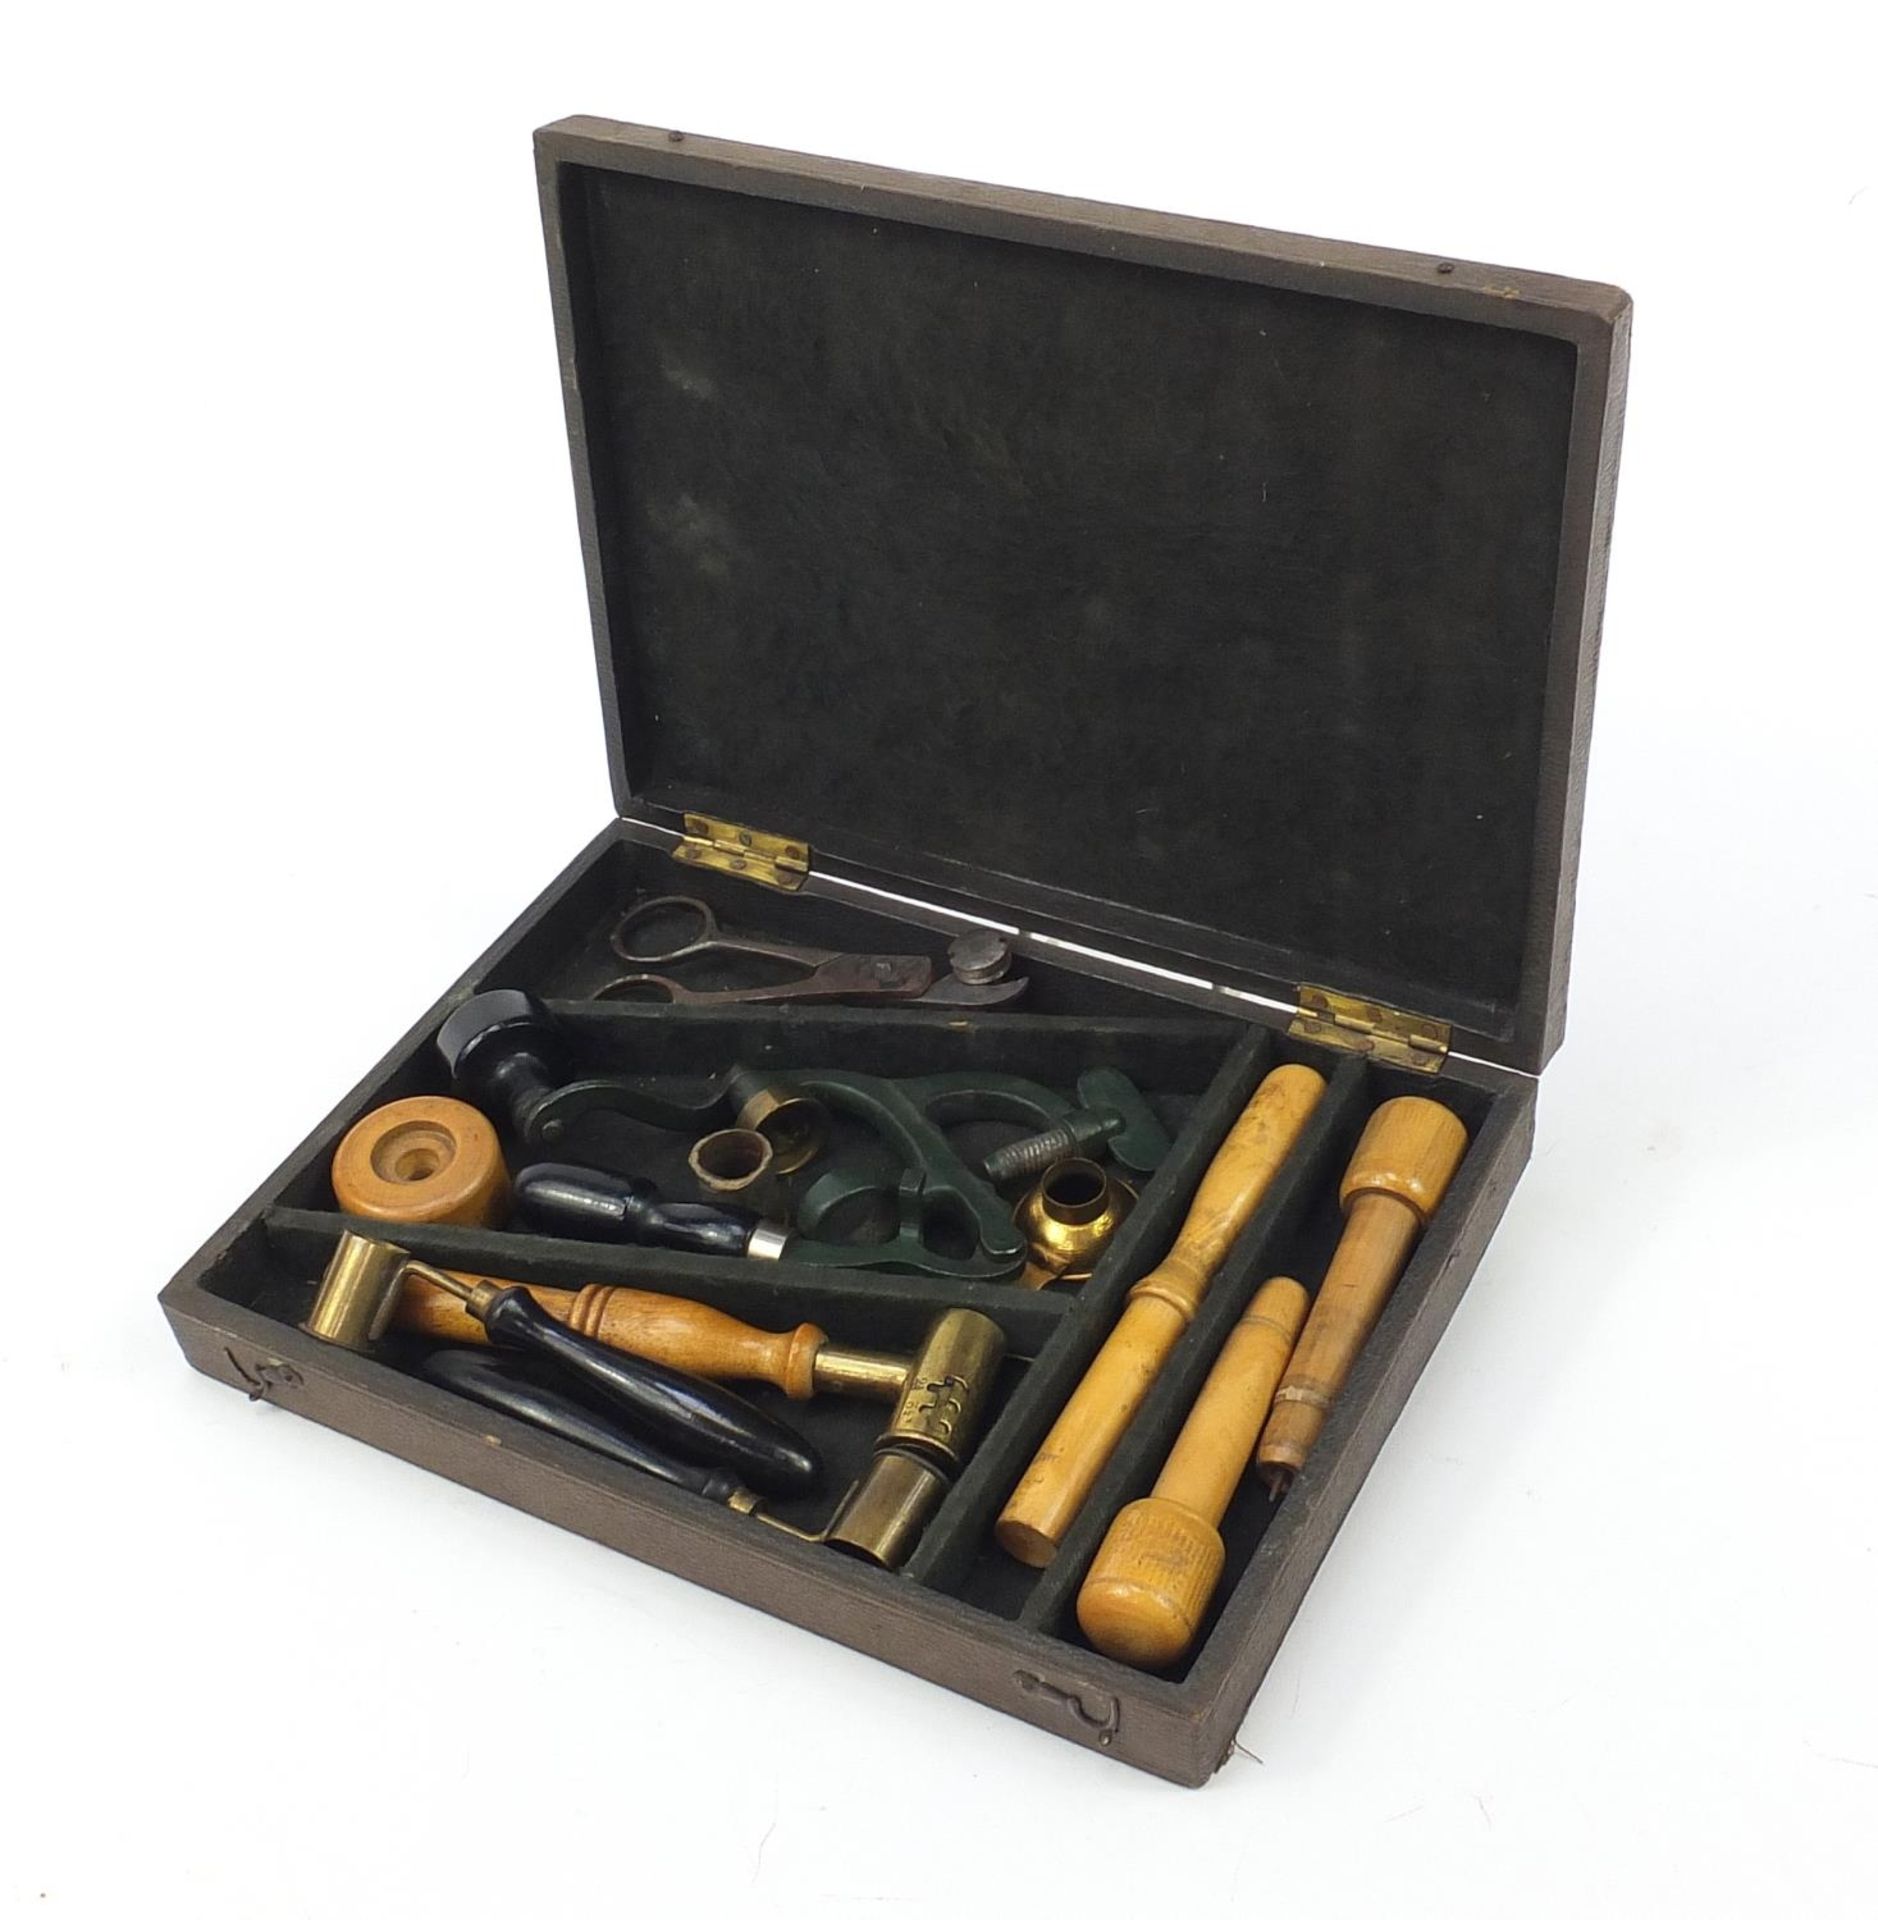 Antique gun ammunition making equipment including a cartridge maker, clamps and scissors housed in a - Image 4 of 5